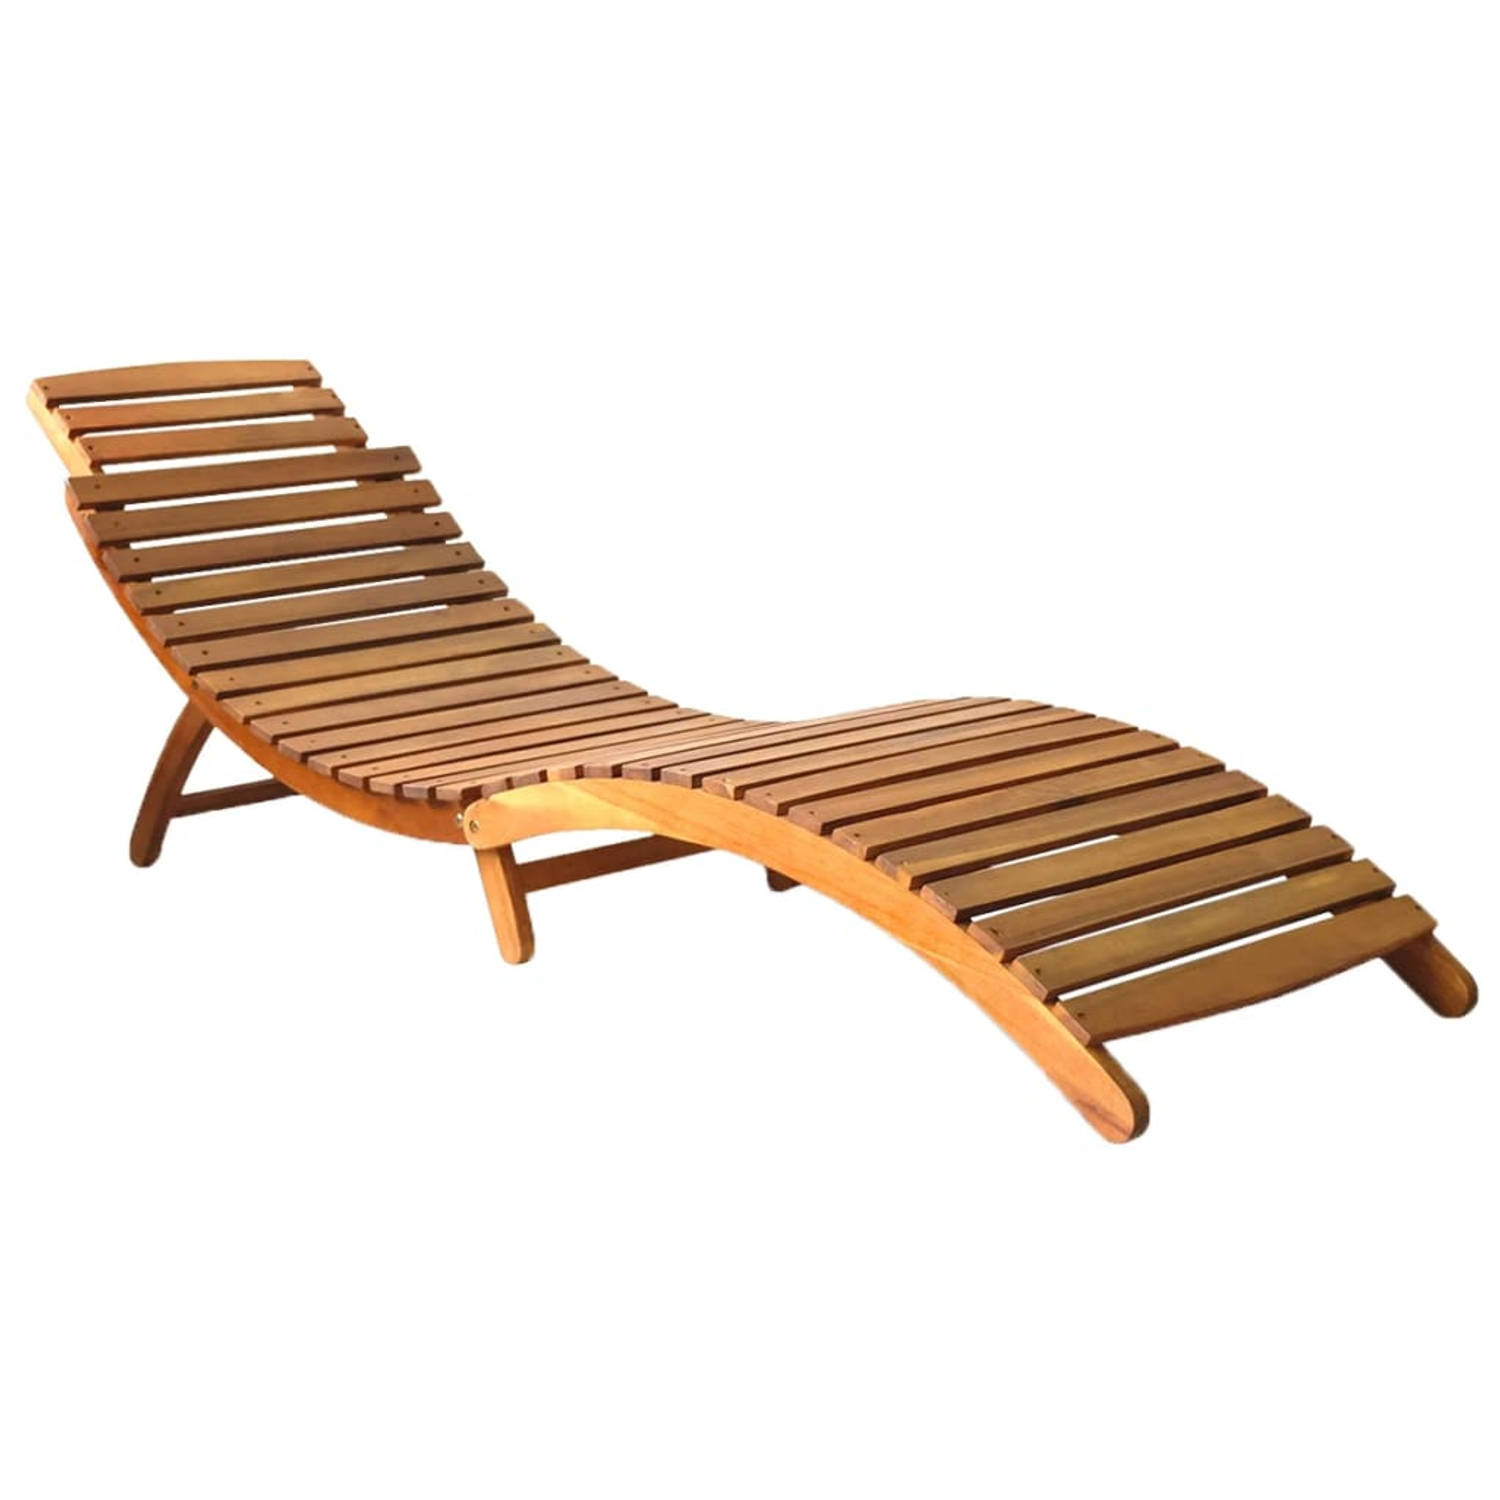 The Living Store Houten Ligbed Tuinbed - 184 x 55 x 64 cm - massief acaciahout